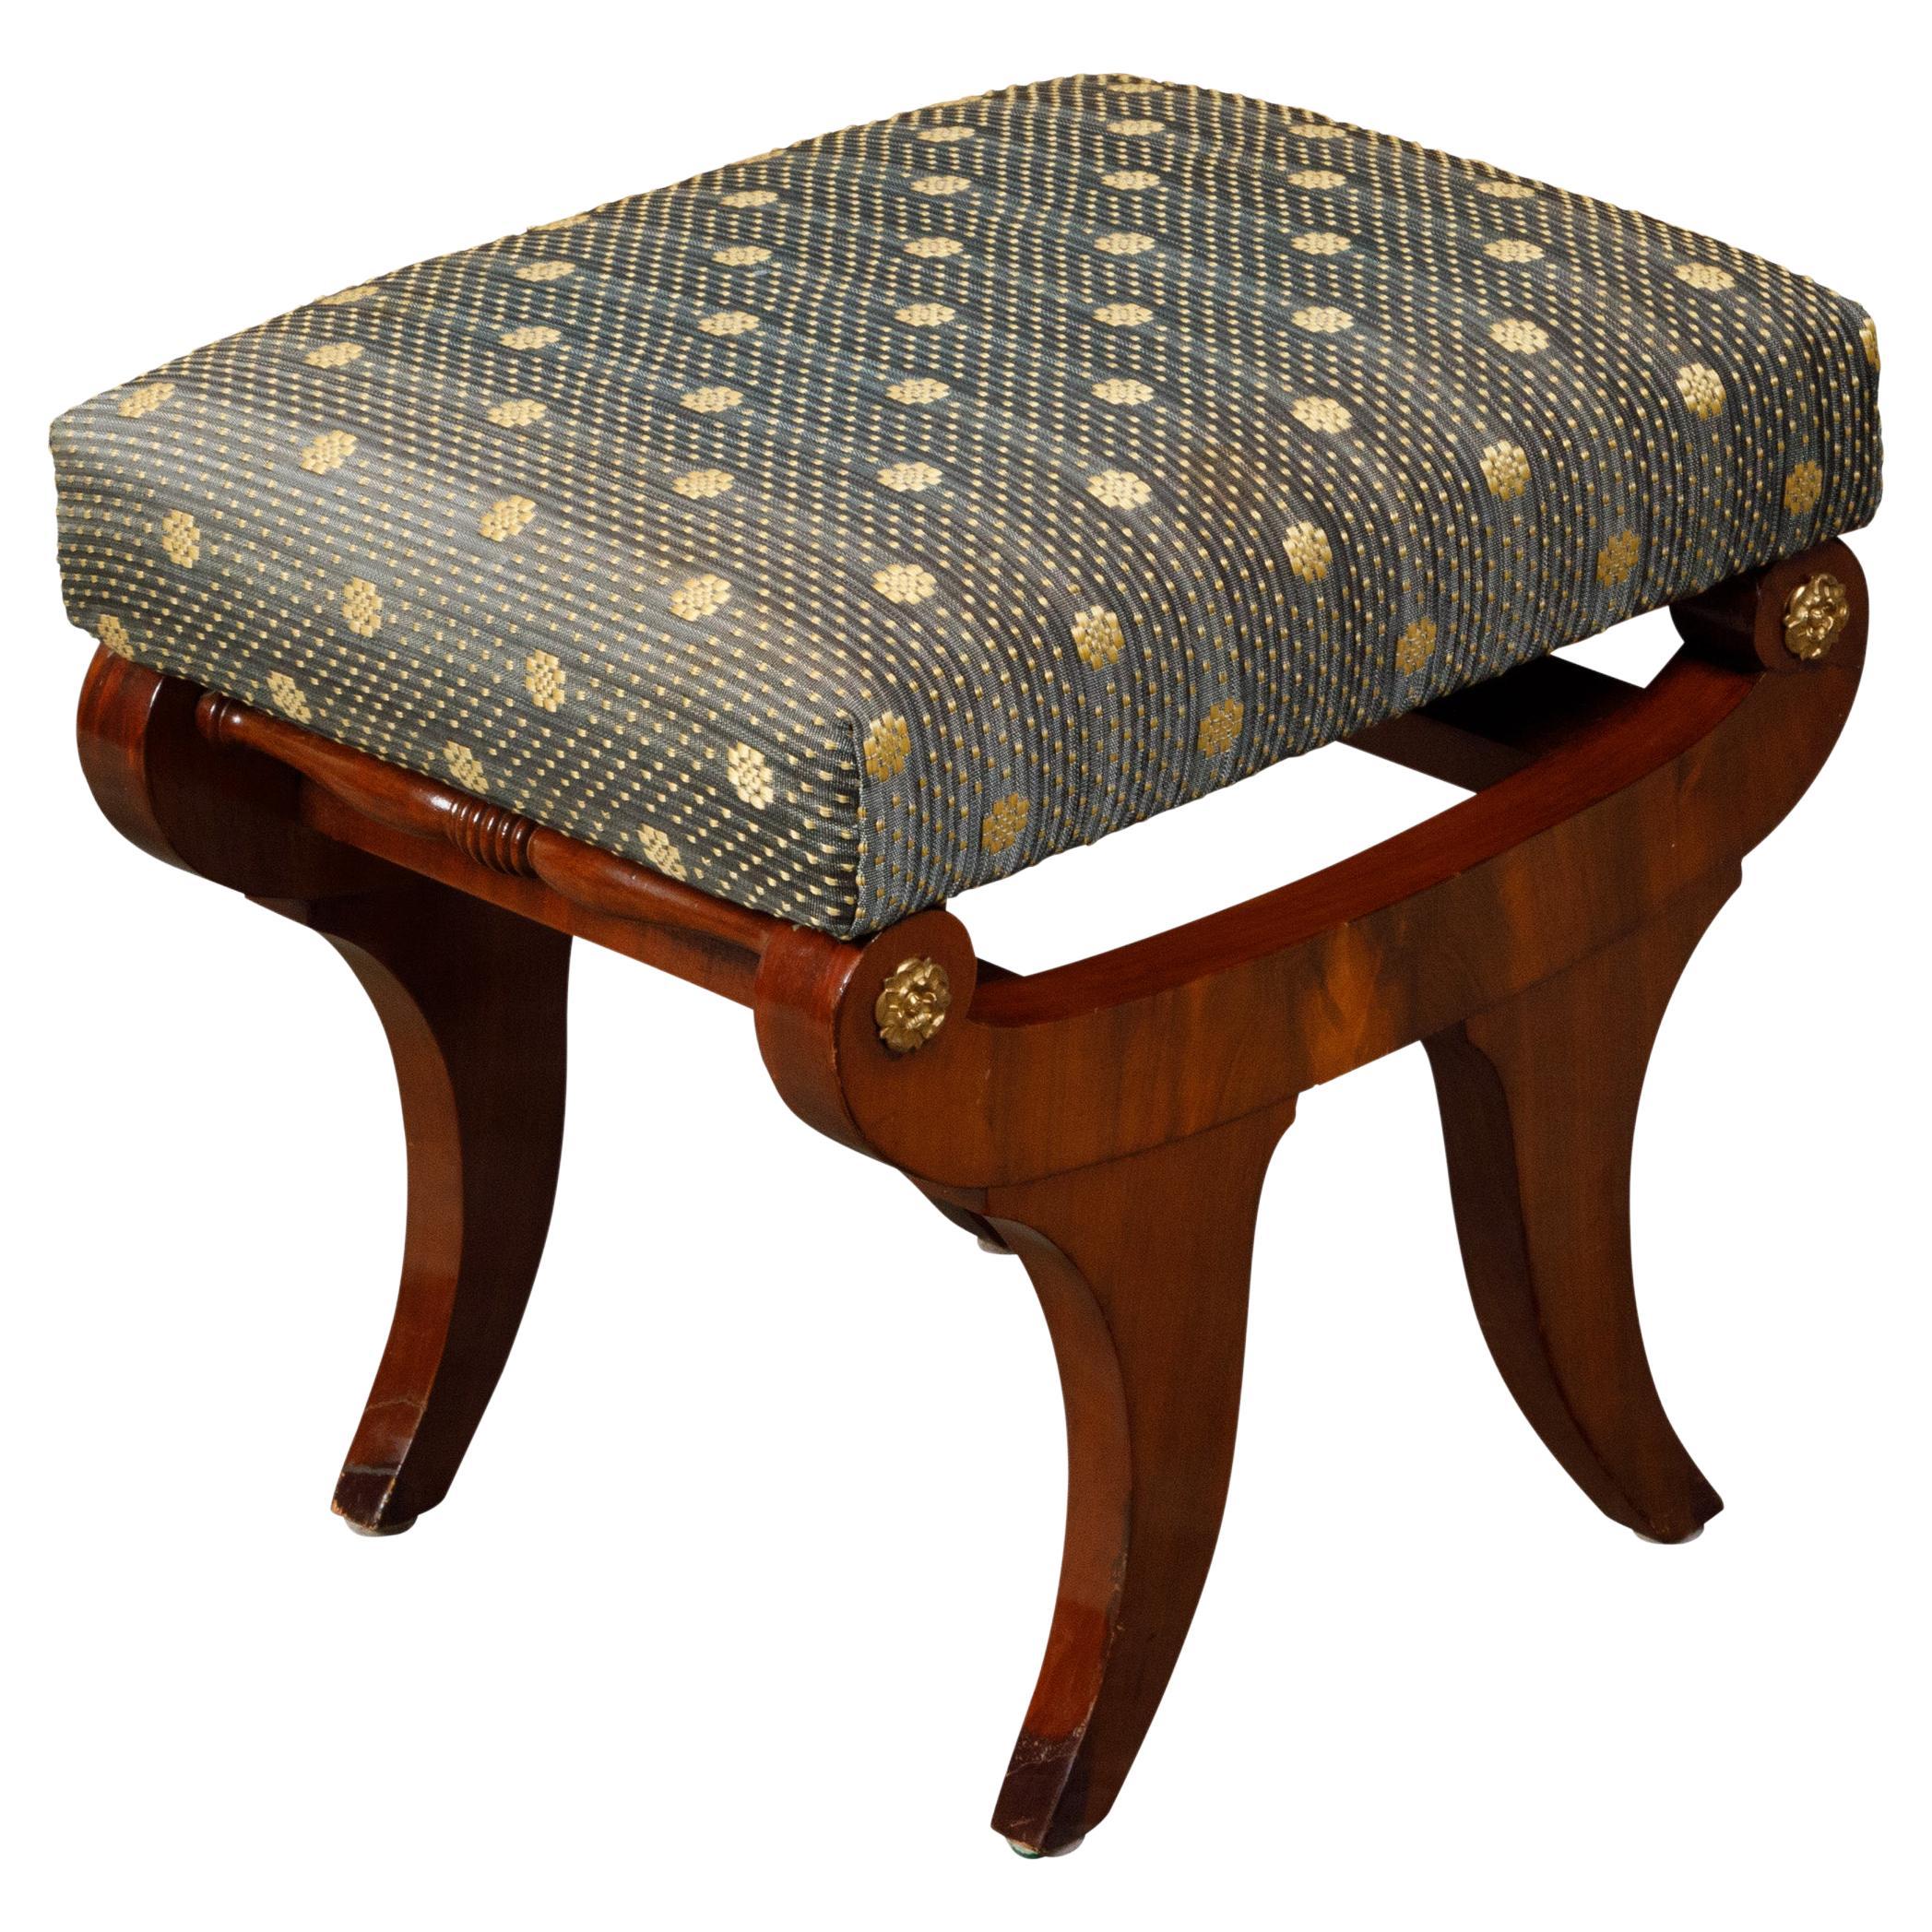 Biedermeier Period 19th Century Walnut Stool with Gilt Rosettes and Upholstery For Sale